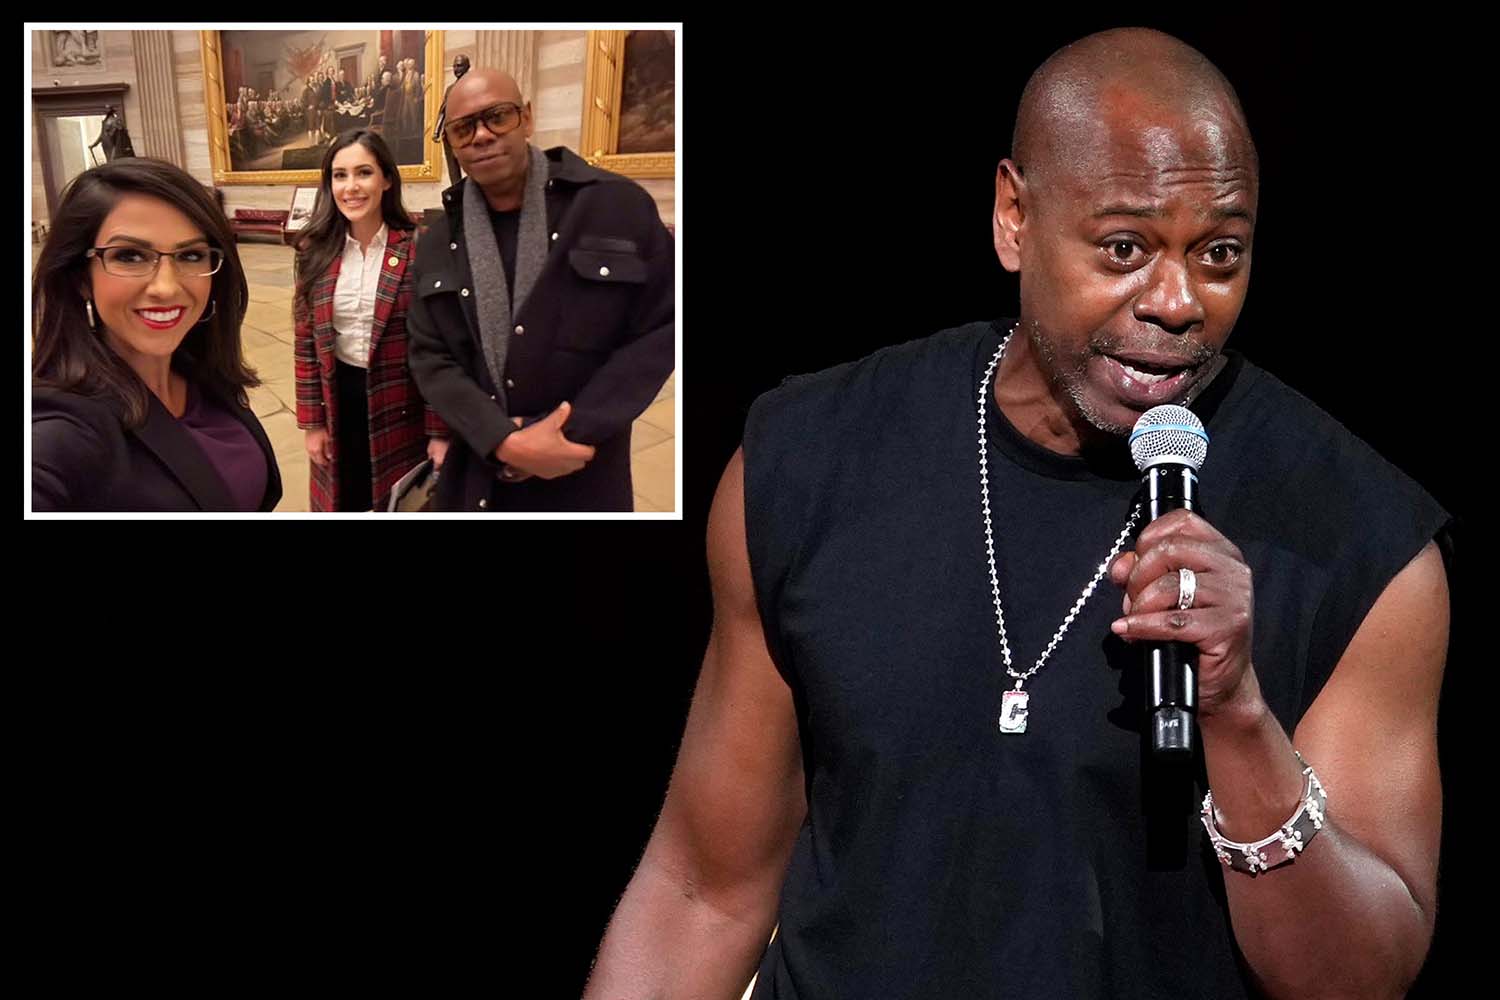 Rep. Lauren Boebert Takes Selfie With Dave Chappelle On Capitol Hill